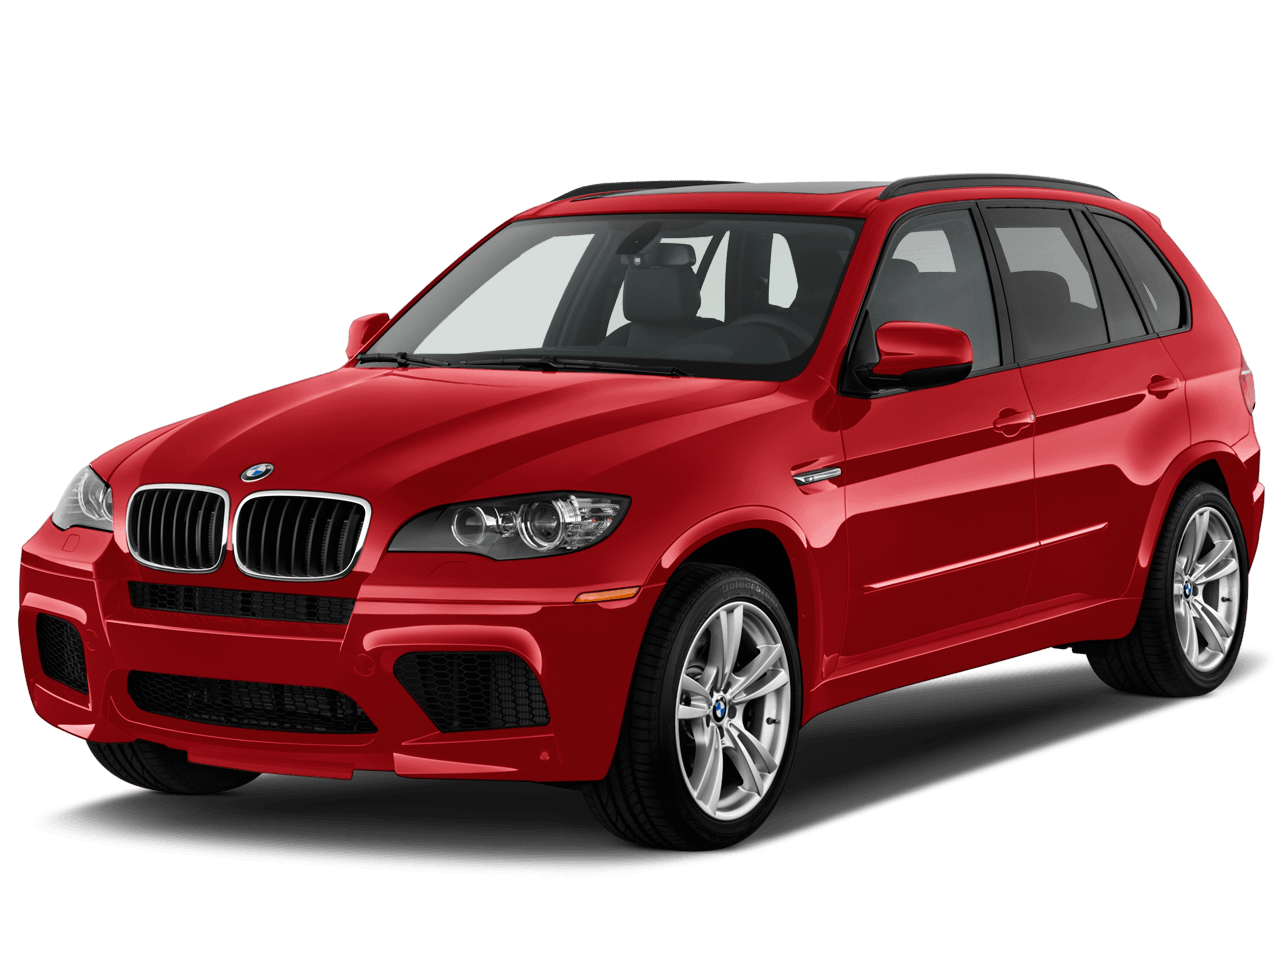 Red X5 Bmw Png Image Download PNG Image